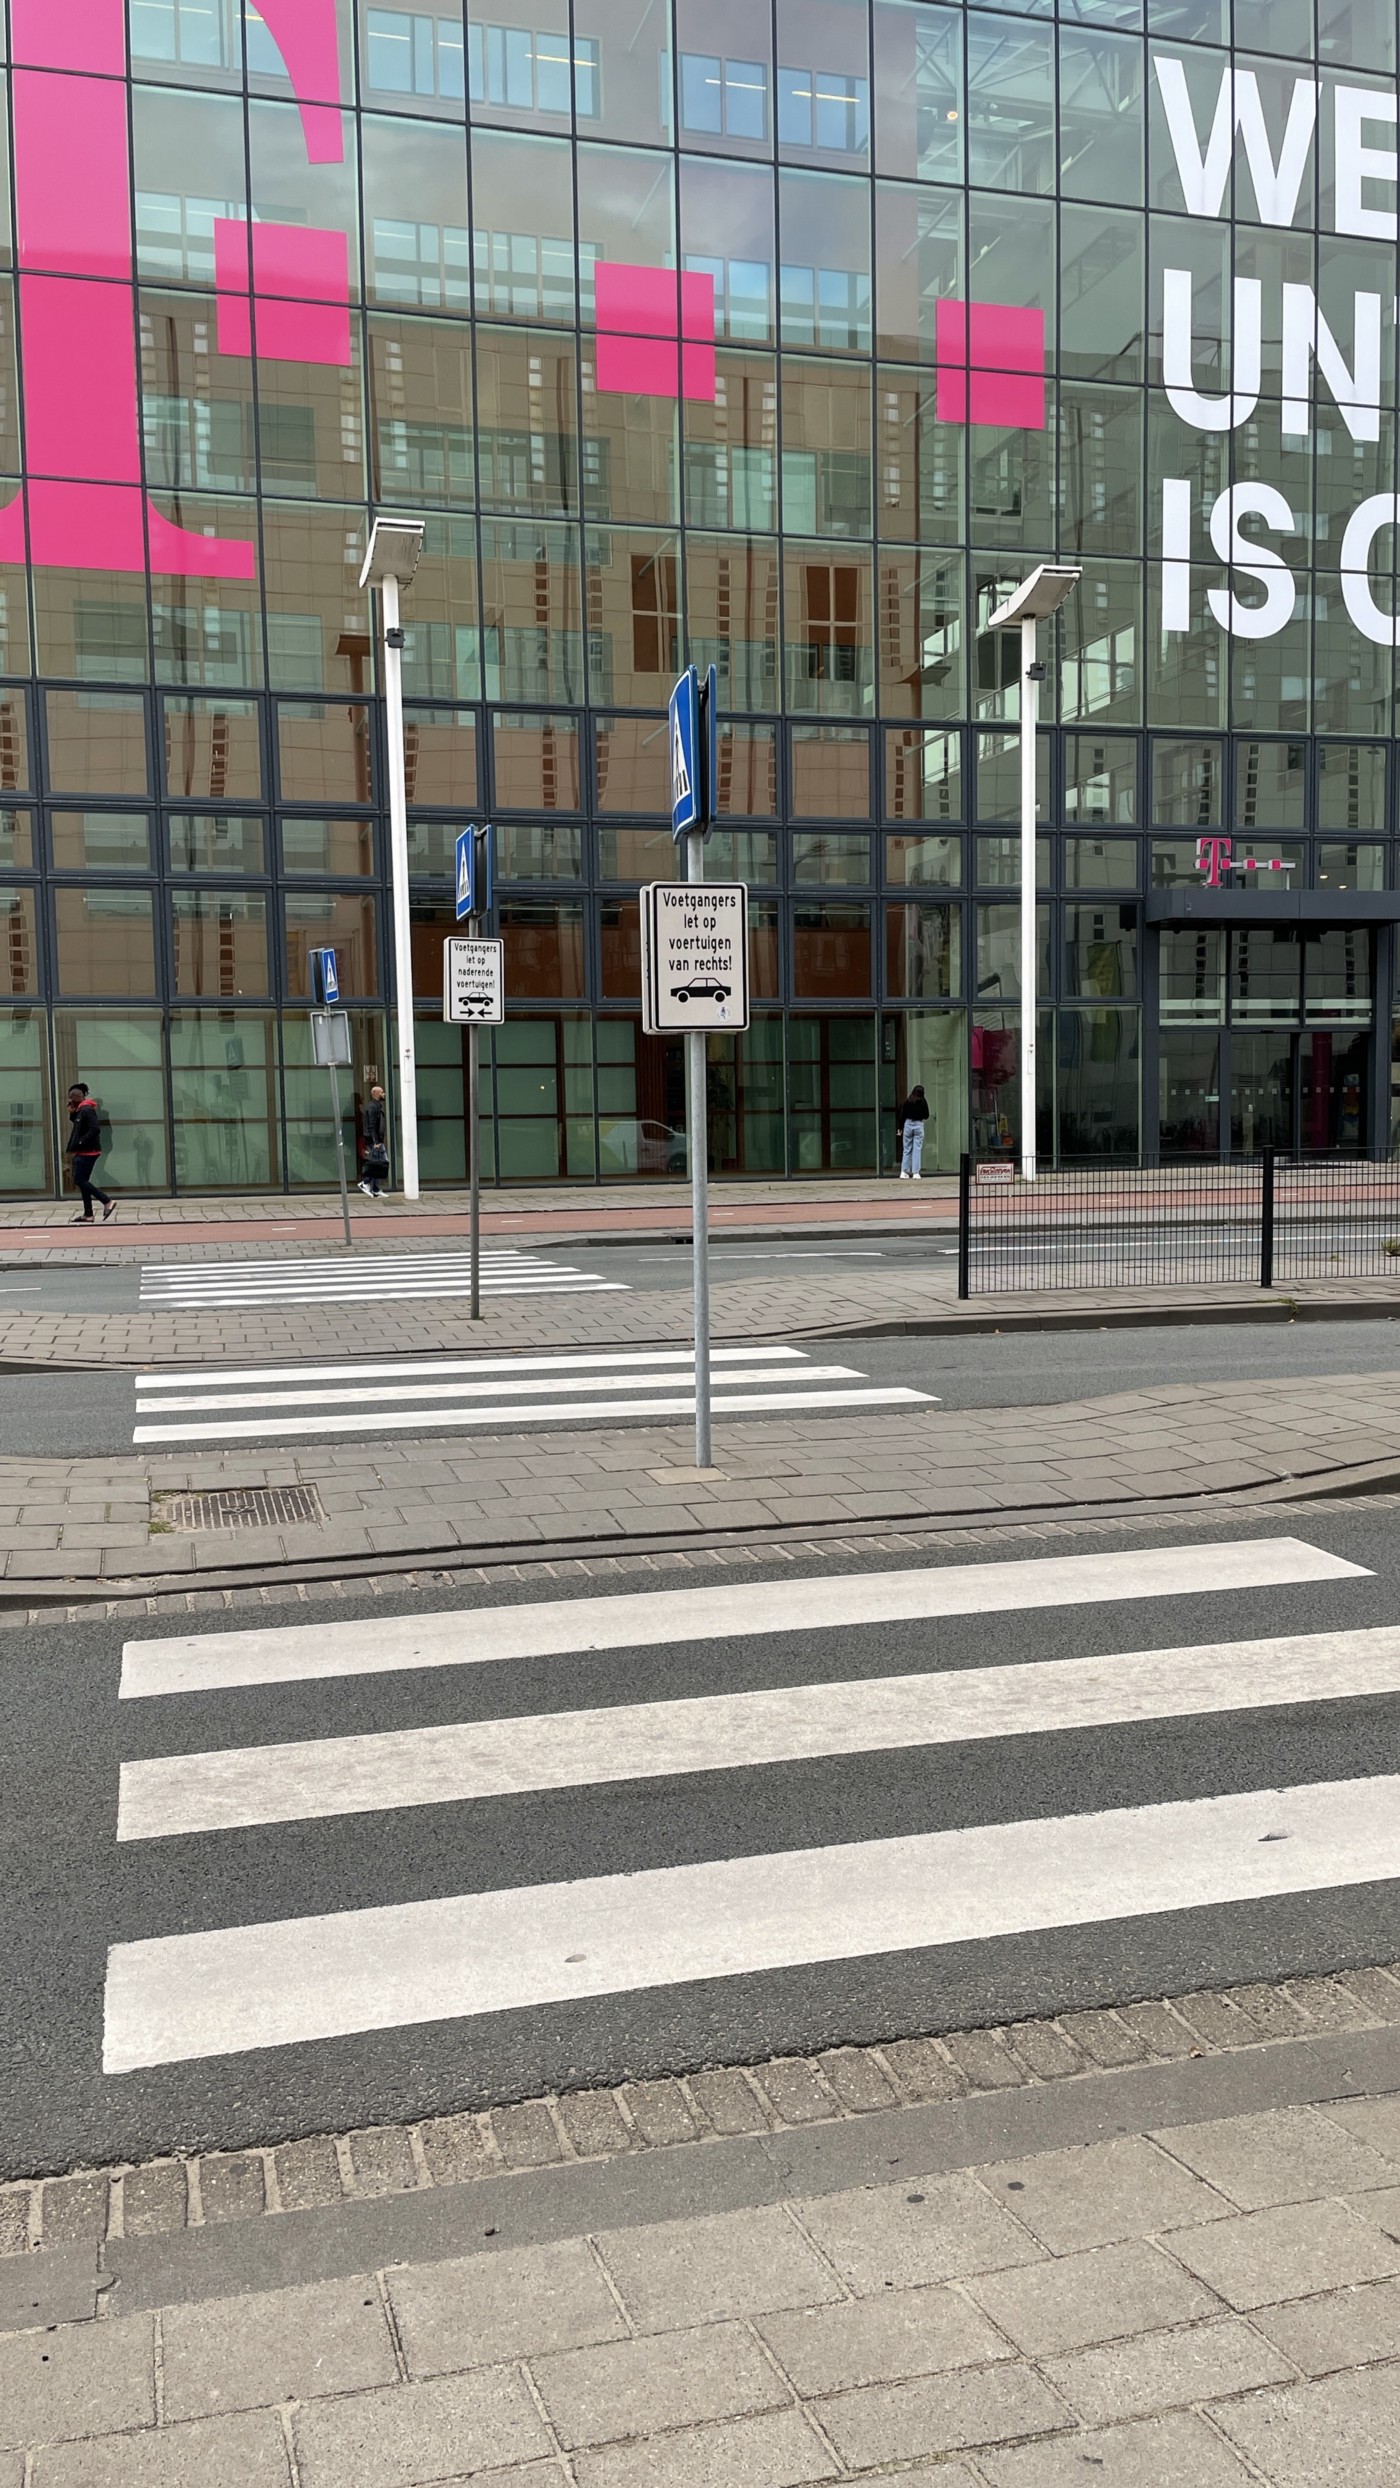 The three crossings as a pedestrian would normally see them: only the second sign is visible (“traffic from the right”)